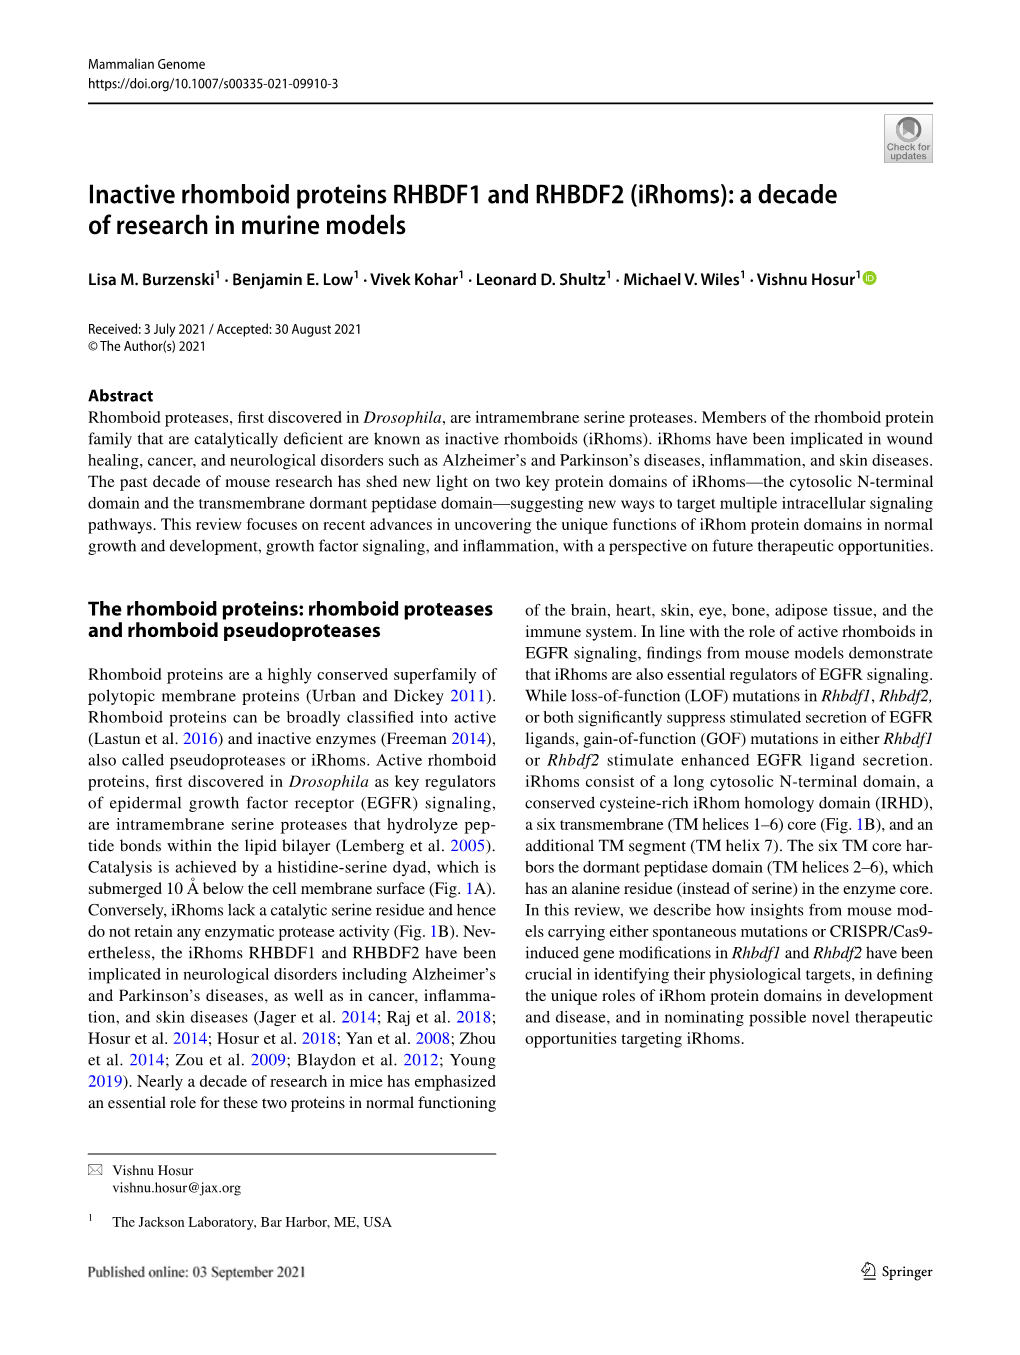 Inactive Rhomboid Proteins RHBDF1 and RHBDF2 (Irhoms): a Decade of Research in Murine Models